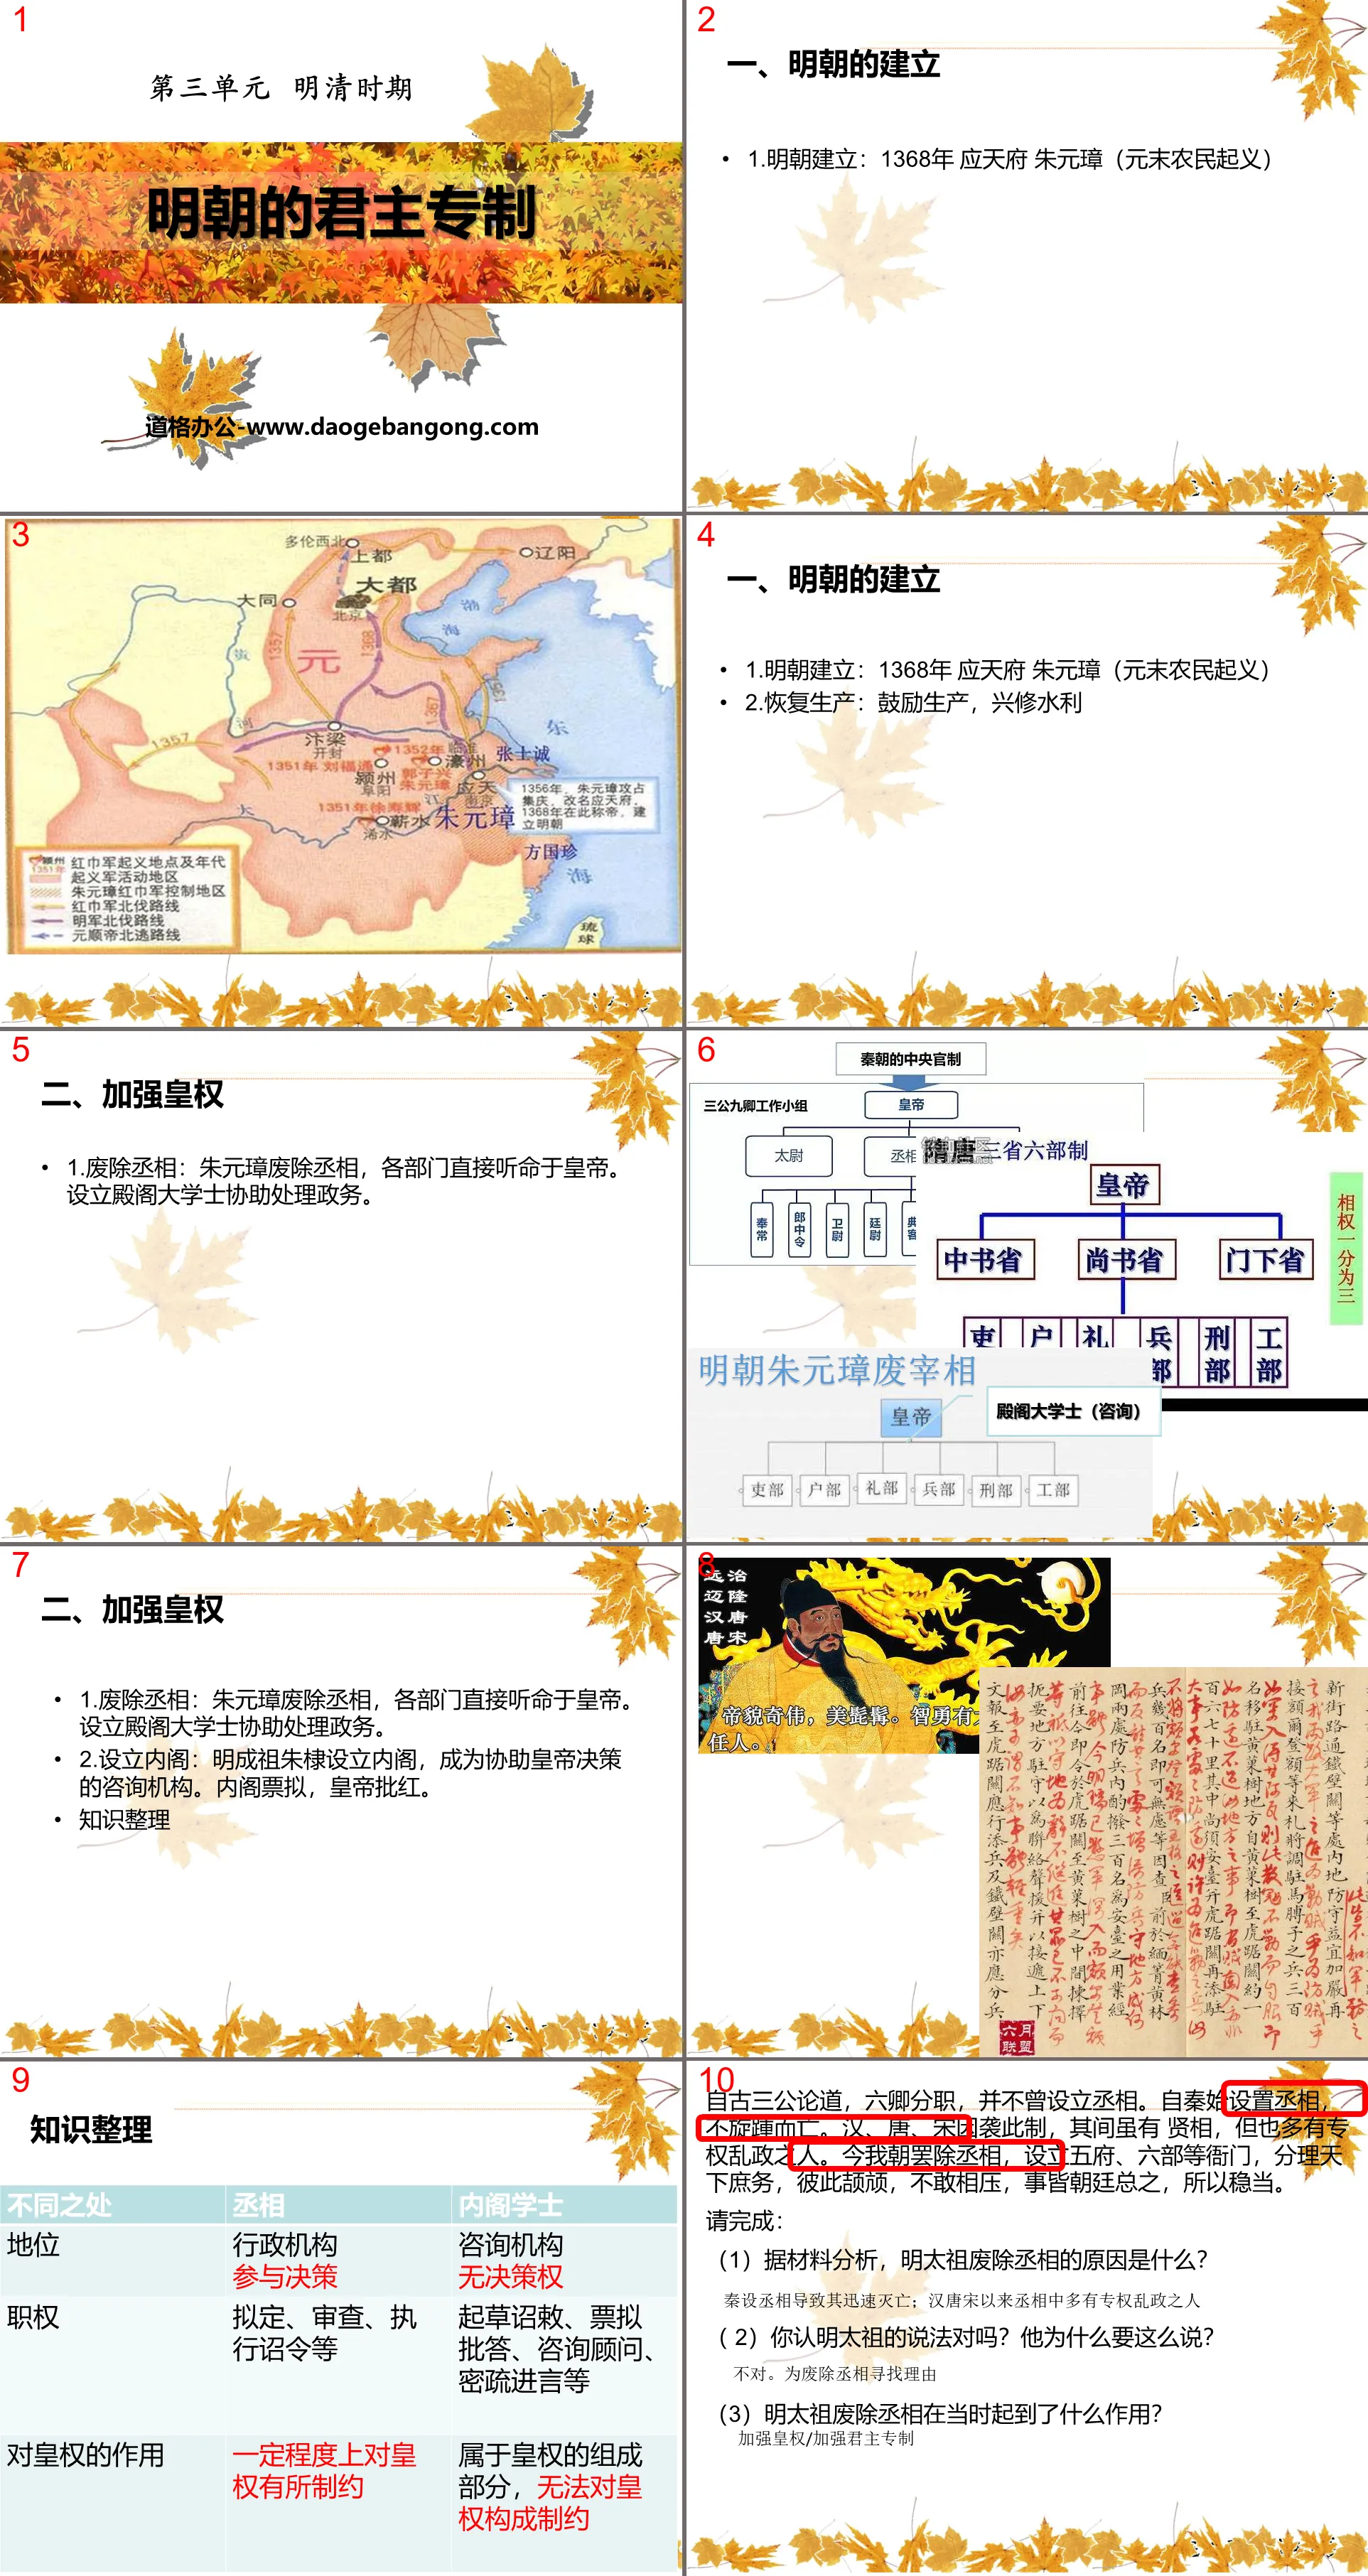 "The Autocratic Monarchy of the Ming Dynasty" PPT courseware 2 during the Ming and Qing Dynasties